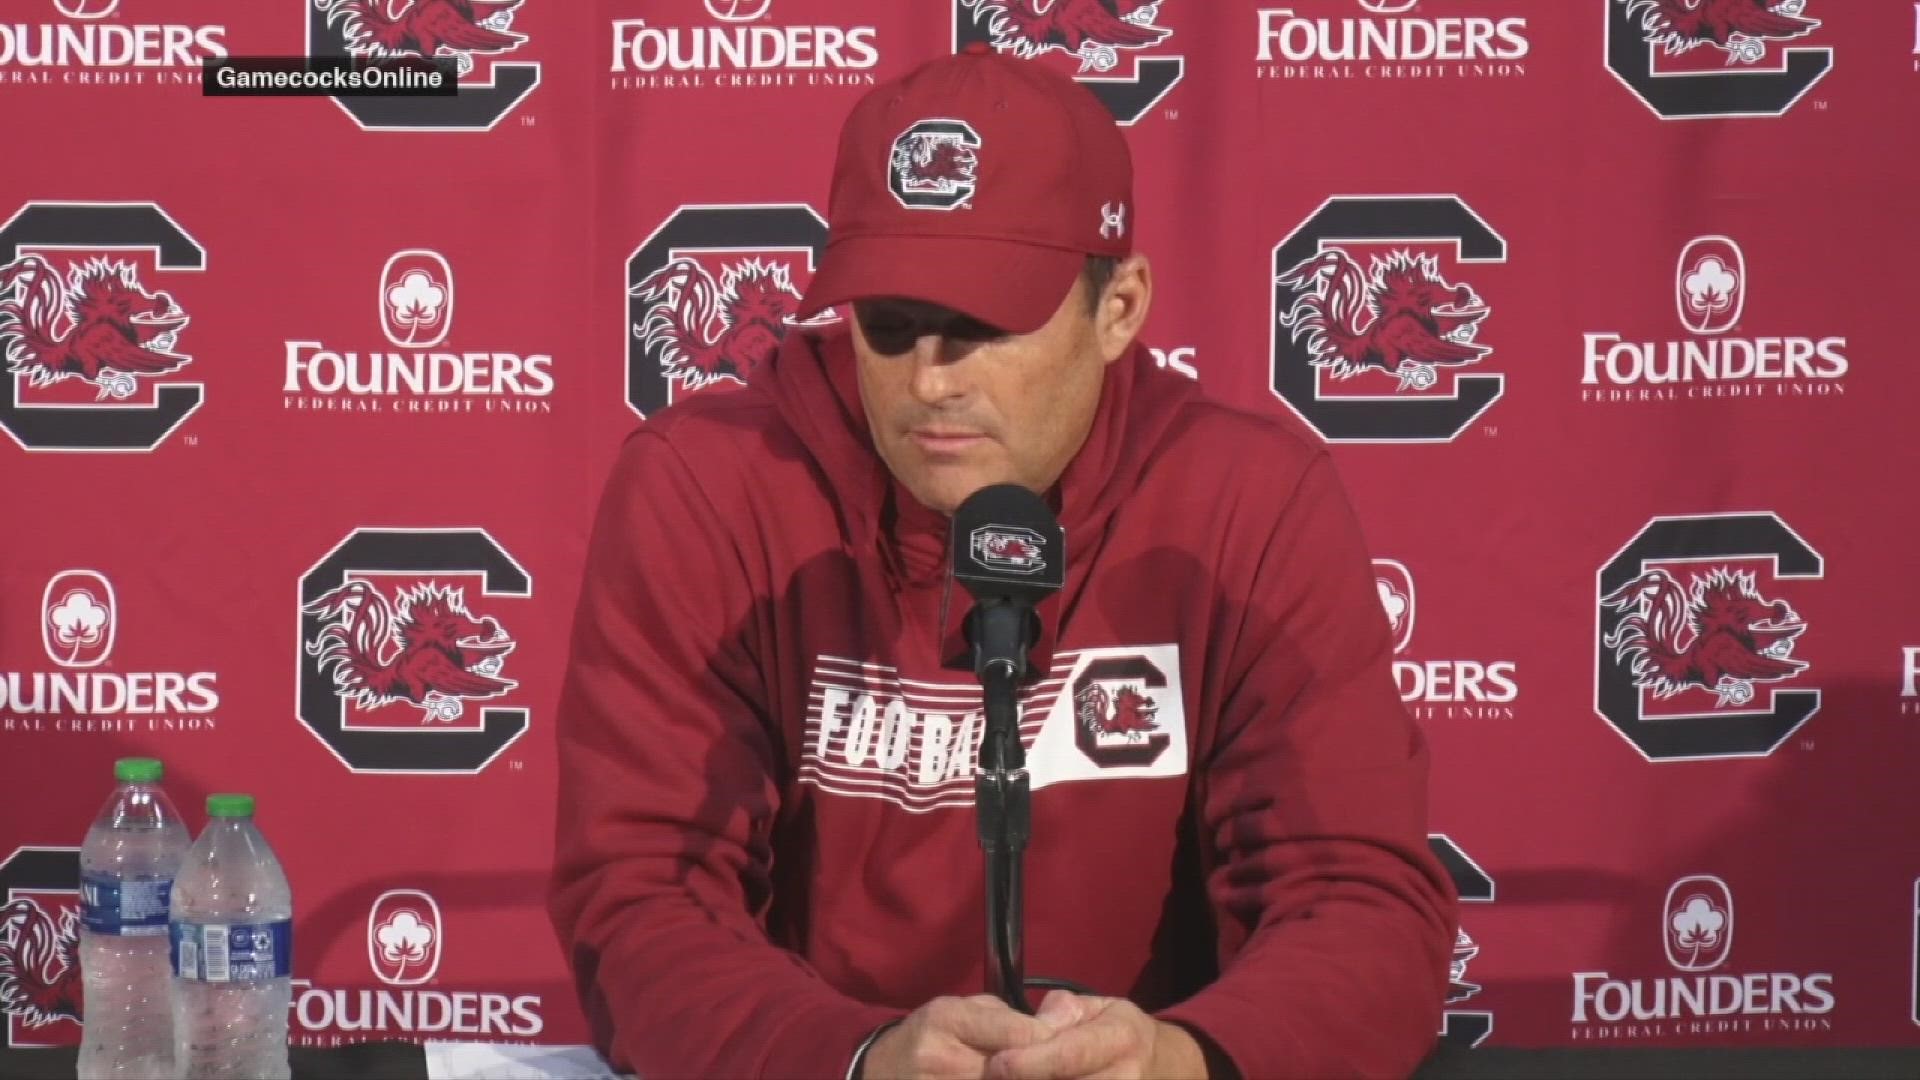 South Carolina head football coach Shane Beamer and S.C. State head coach Buddy Pough speak after the Gamecocks' 50-10 win over the Bulldogs.